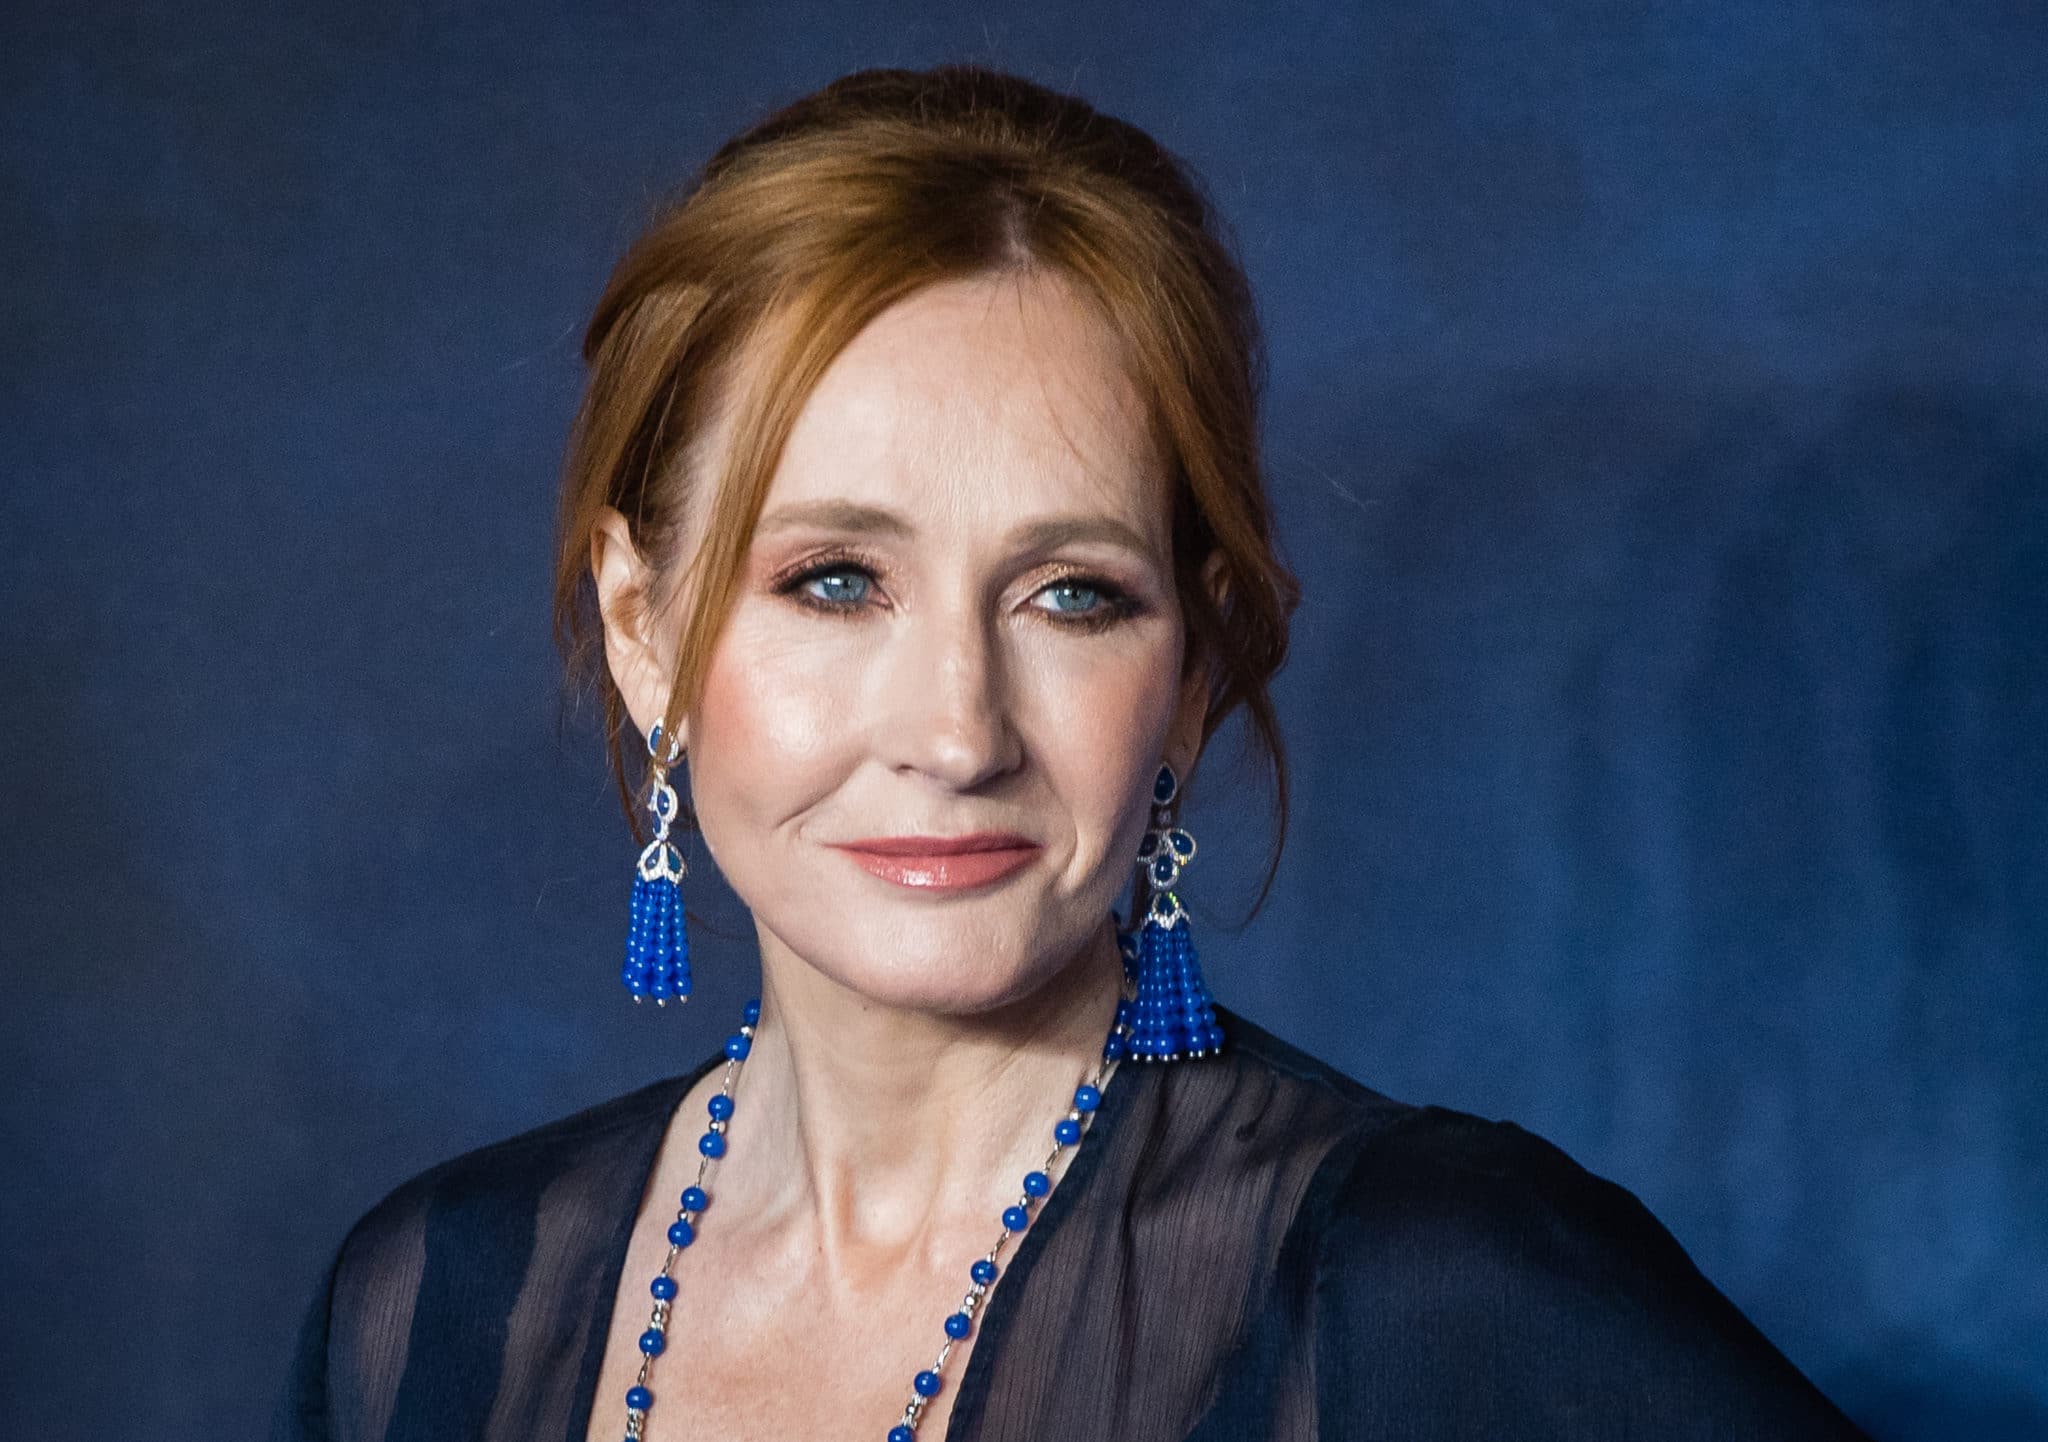 JK Rowling Received A Death Threat - How Many Other Celebrities Have Been The Targets Of Threats?